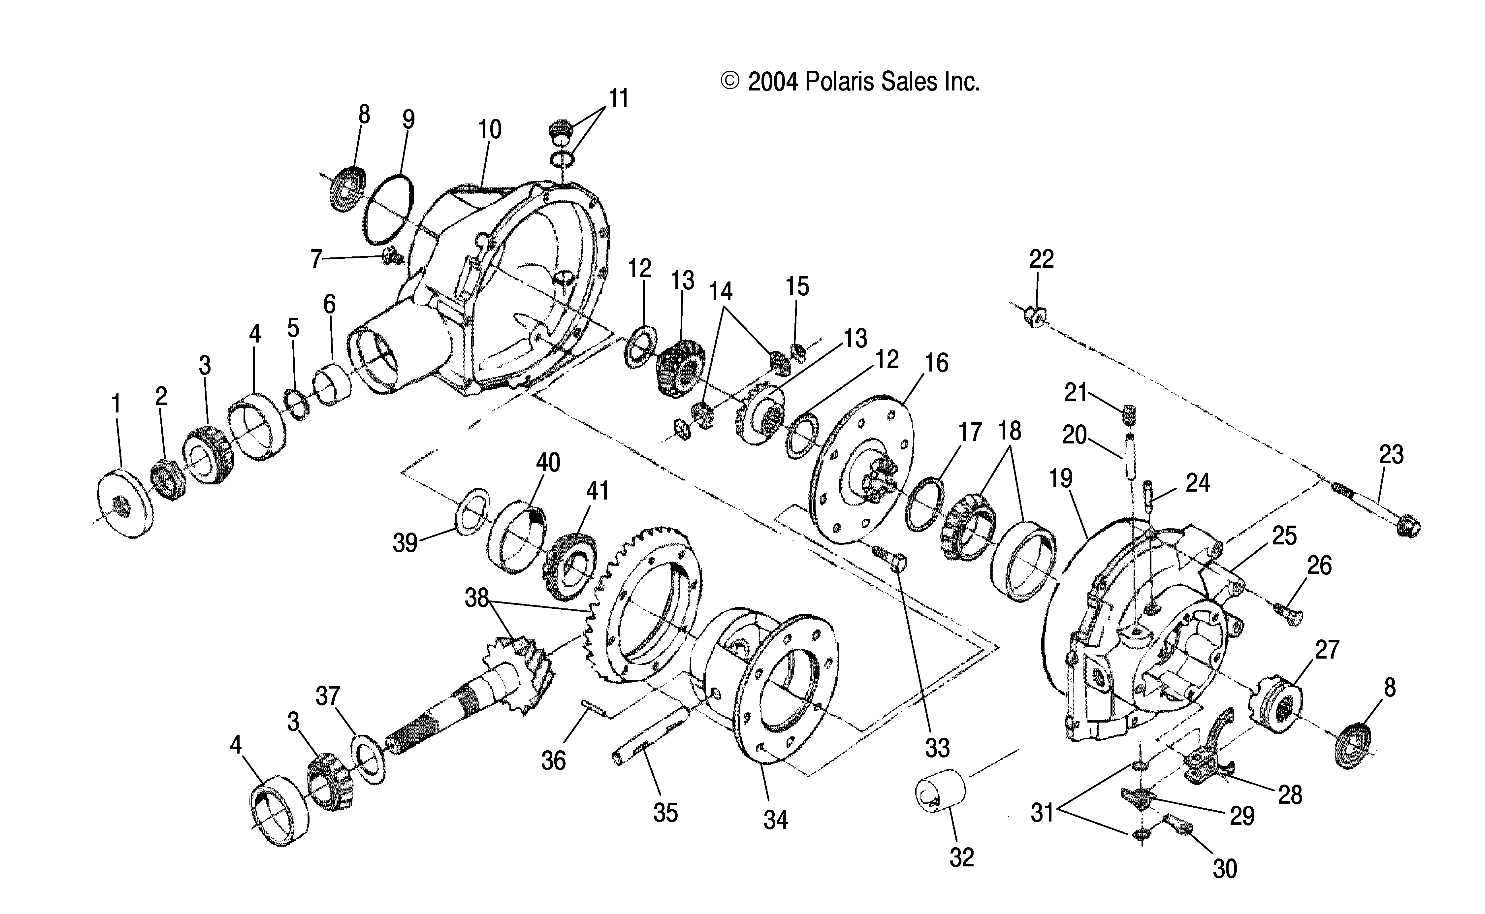 Part Number : 3514433 DIFFERENTIAL BEARING